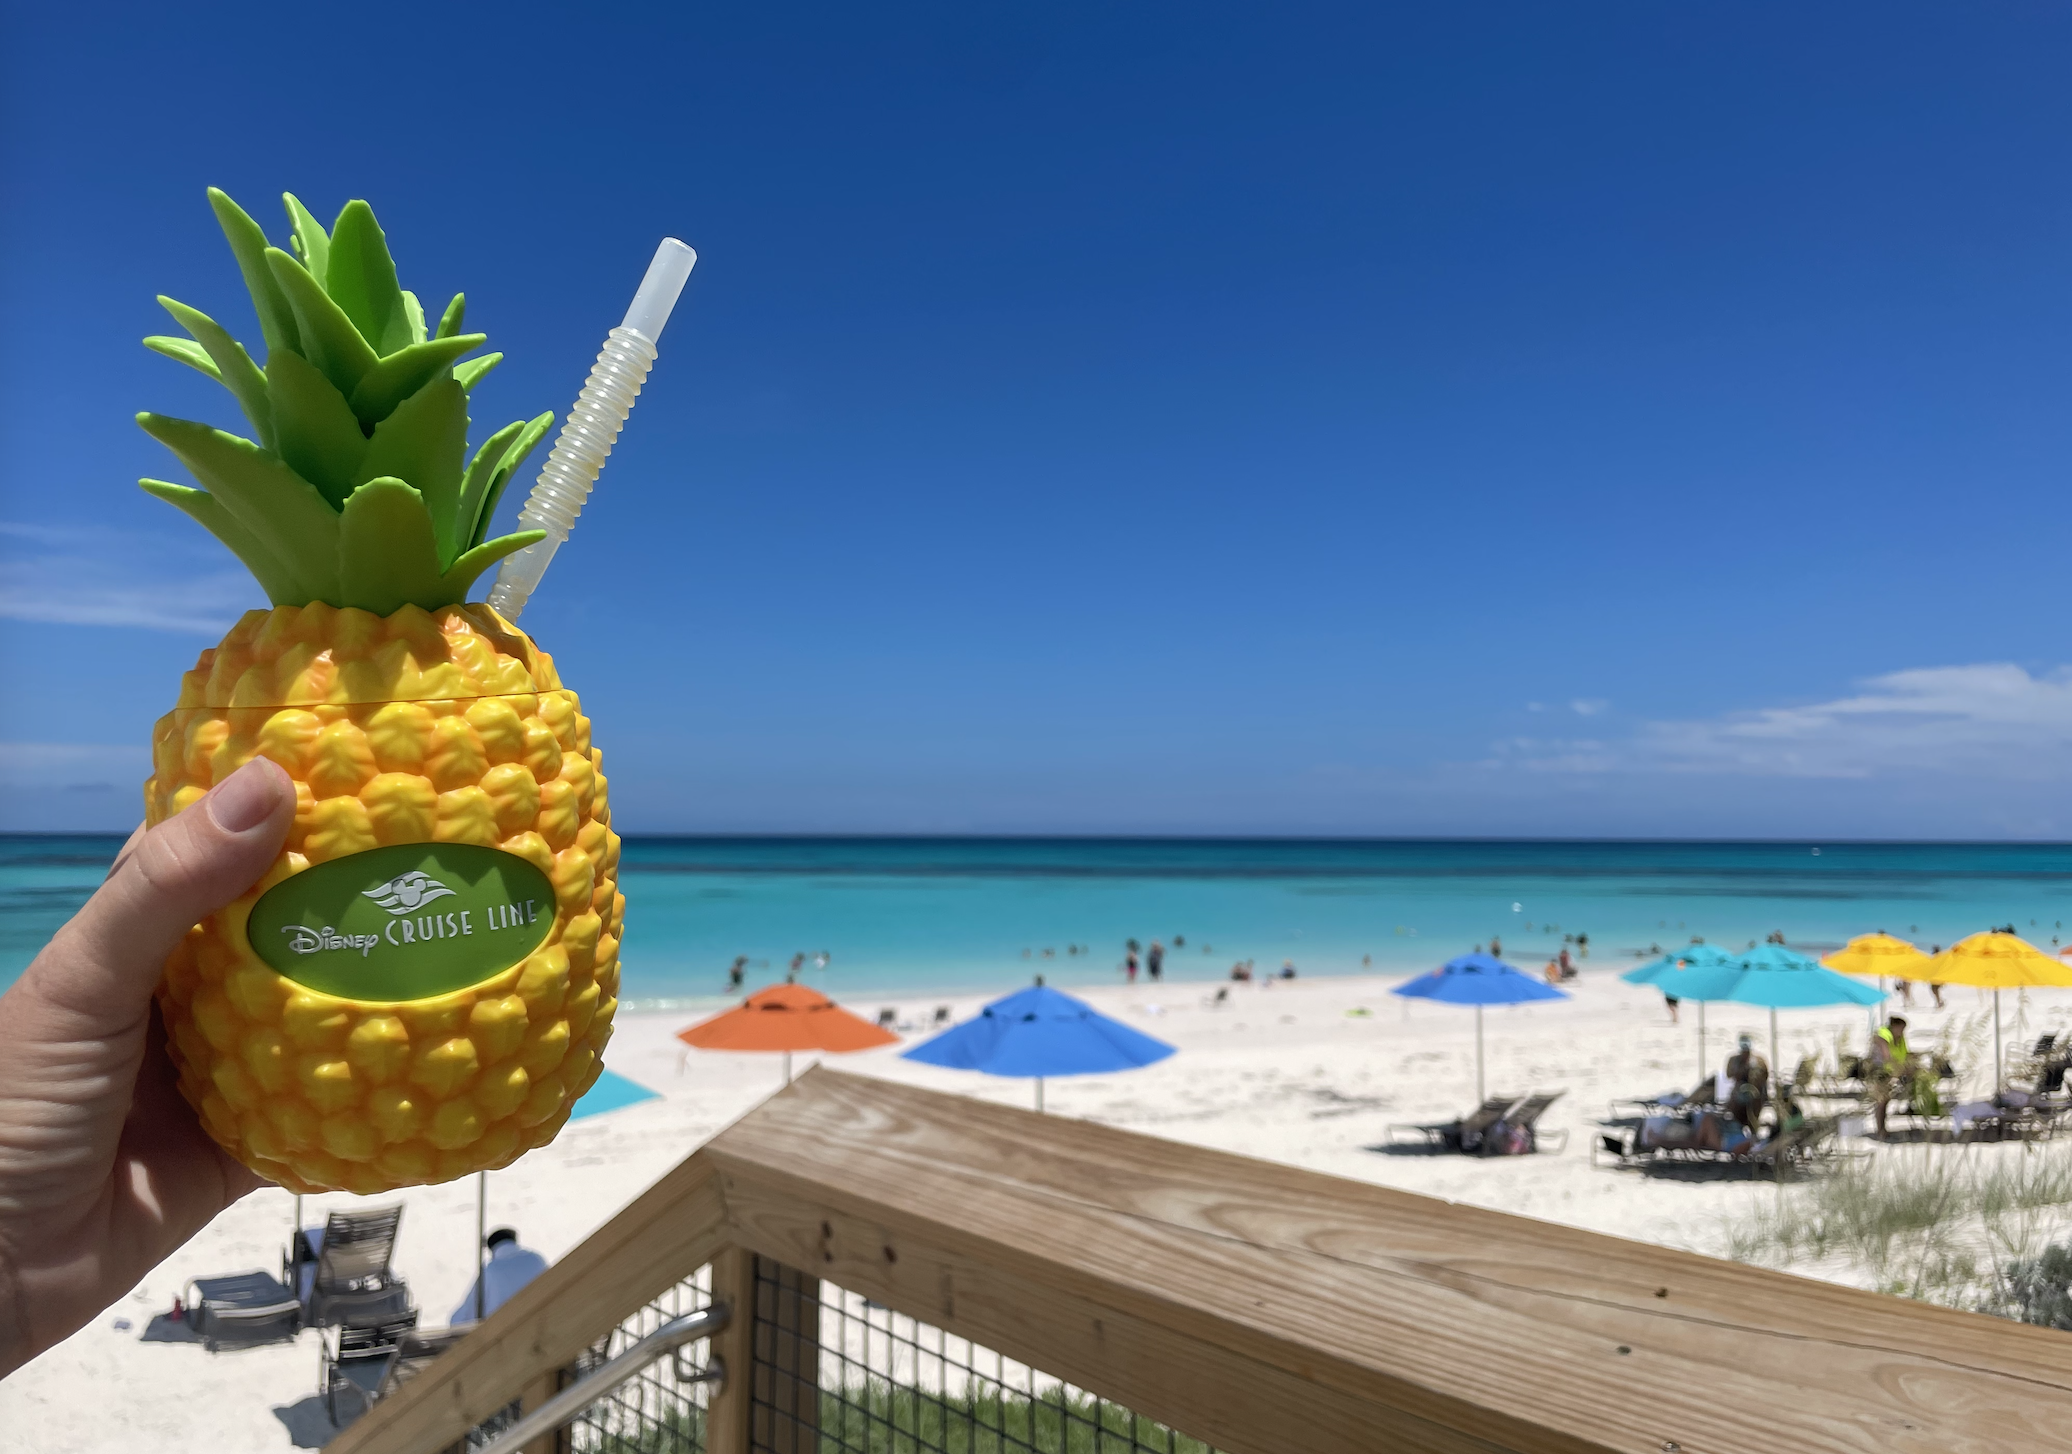 A hand holds a pineapple-shaped Disney Cruise Line cup with a straw on a tropical beach. The beach has colorful umbrellas and people are relaxing by the water